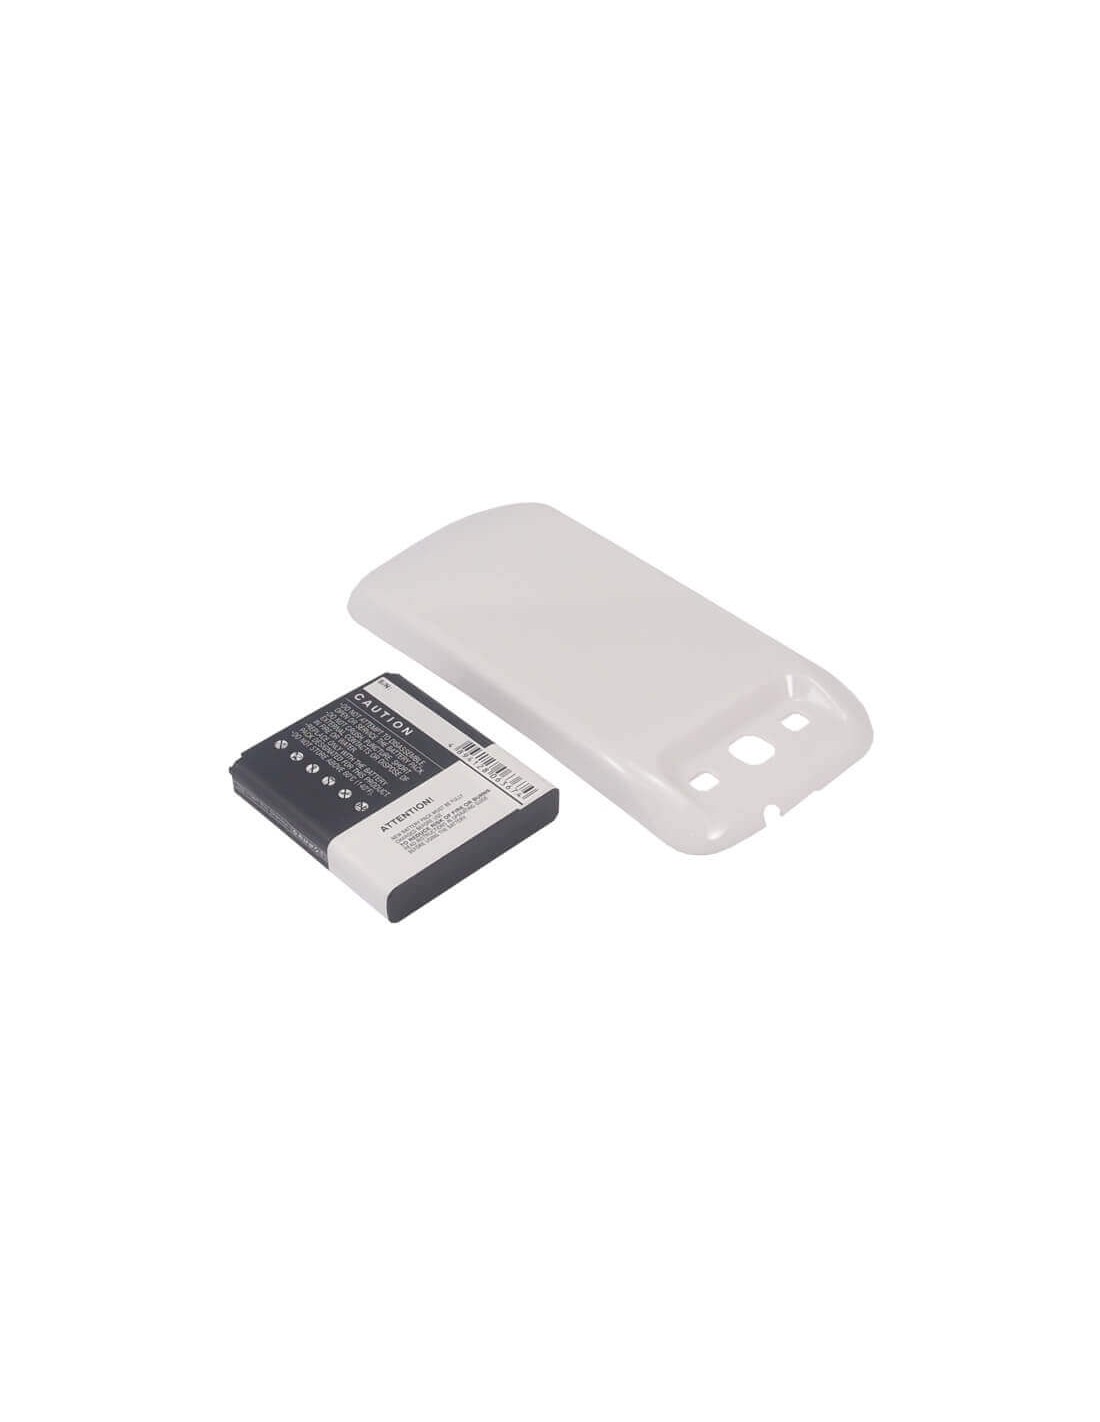 Battery for Samsung Midas, SC-06D with white back cover 3.7V, 4200mAh - 15.54Wh